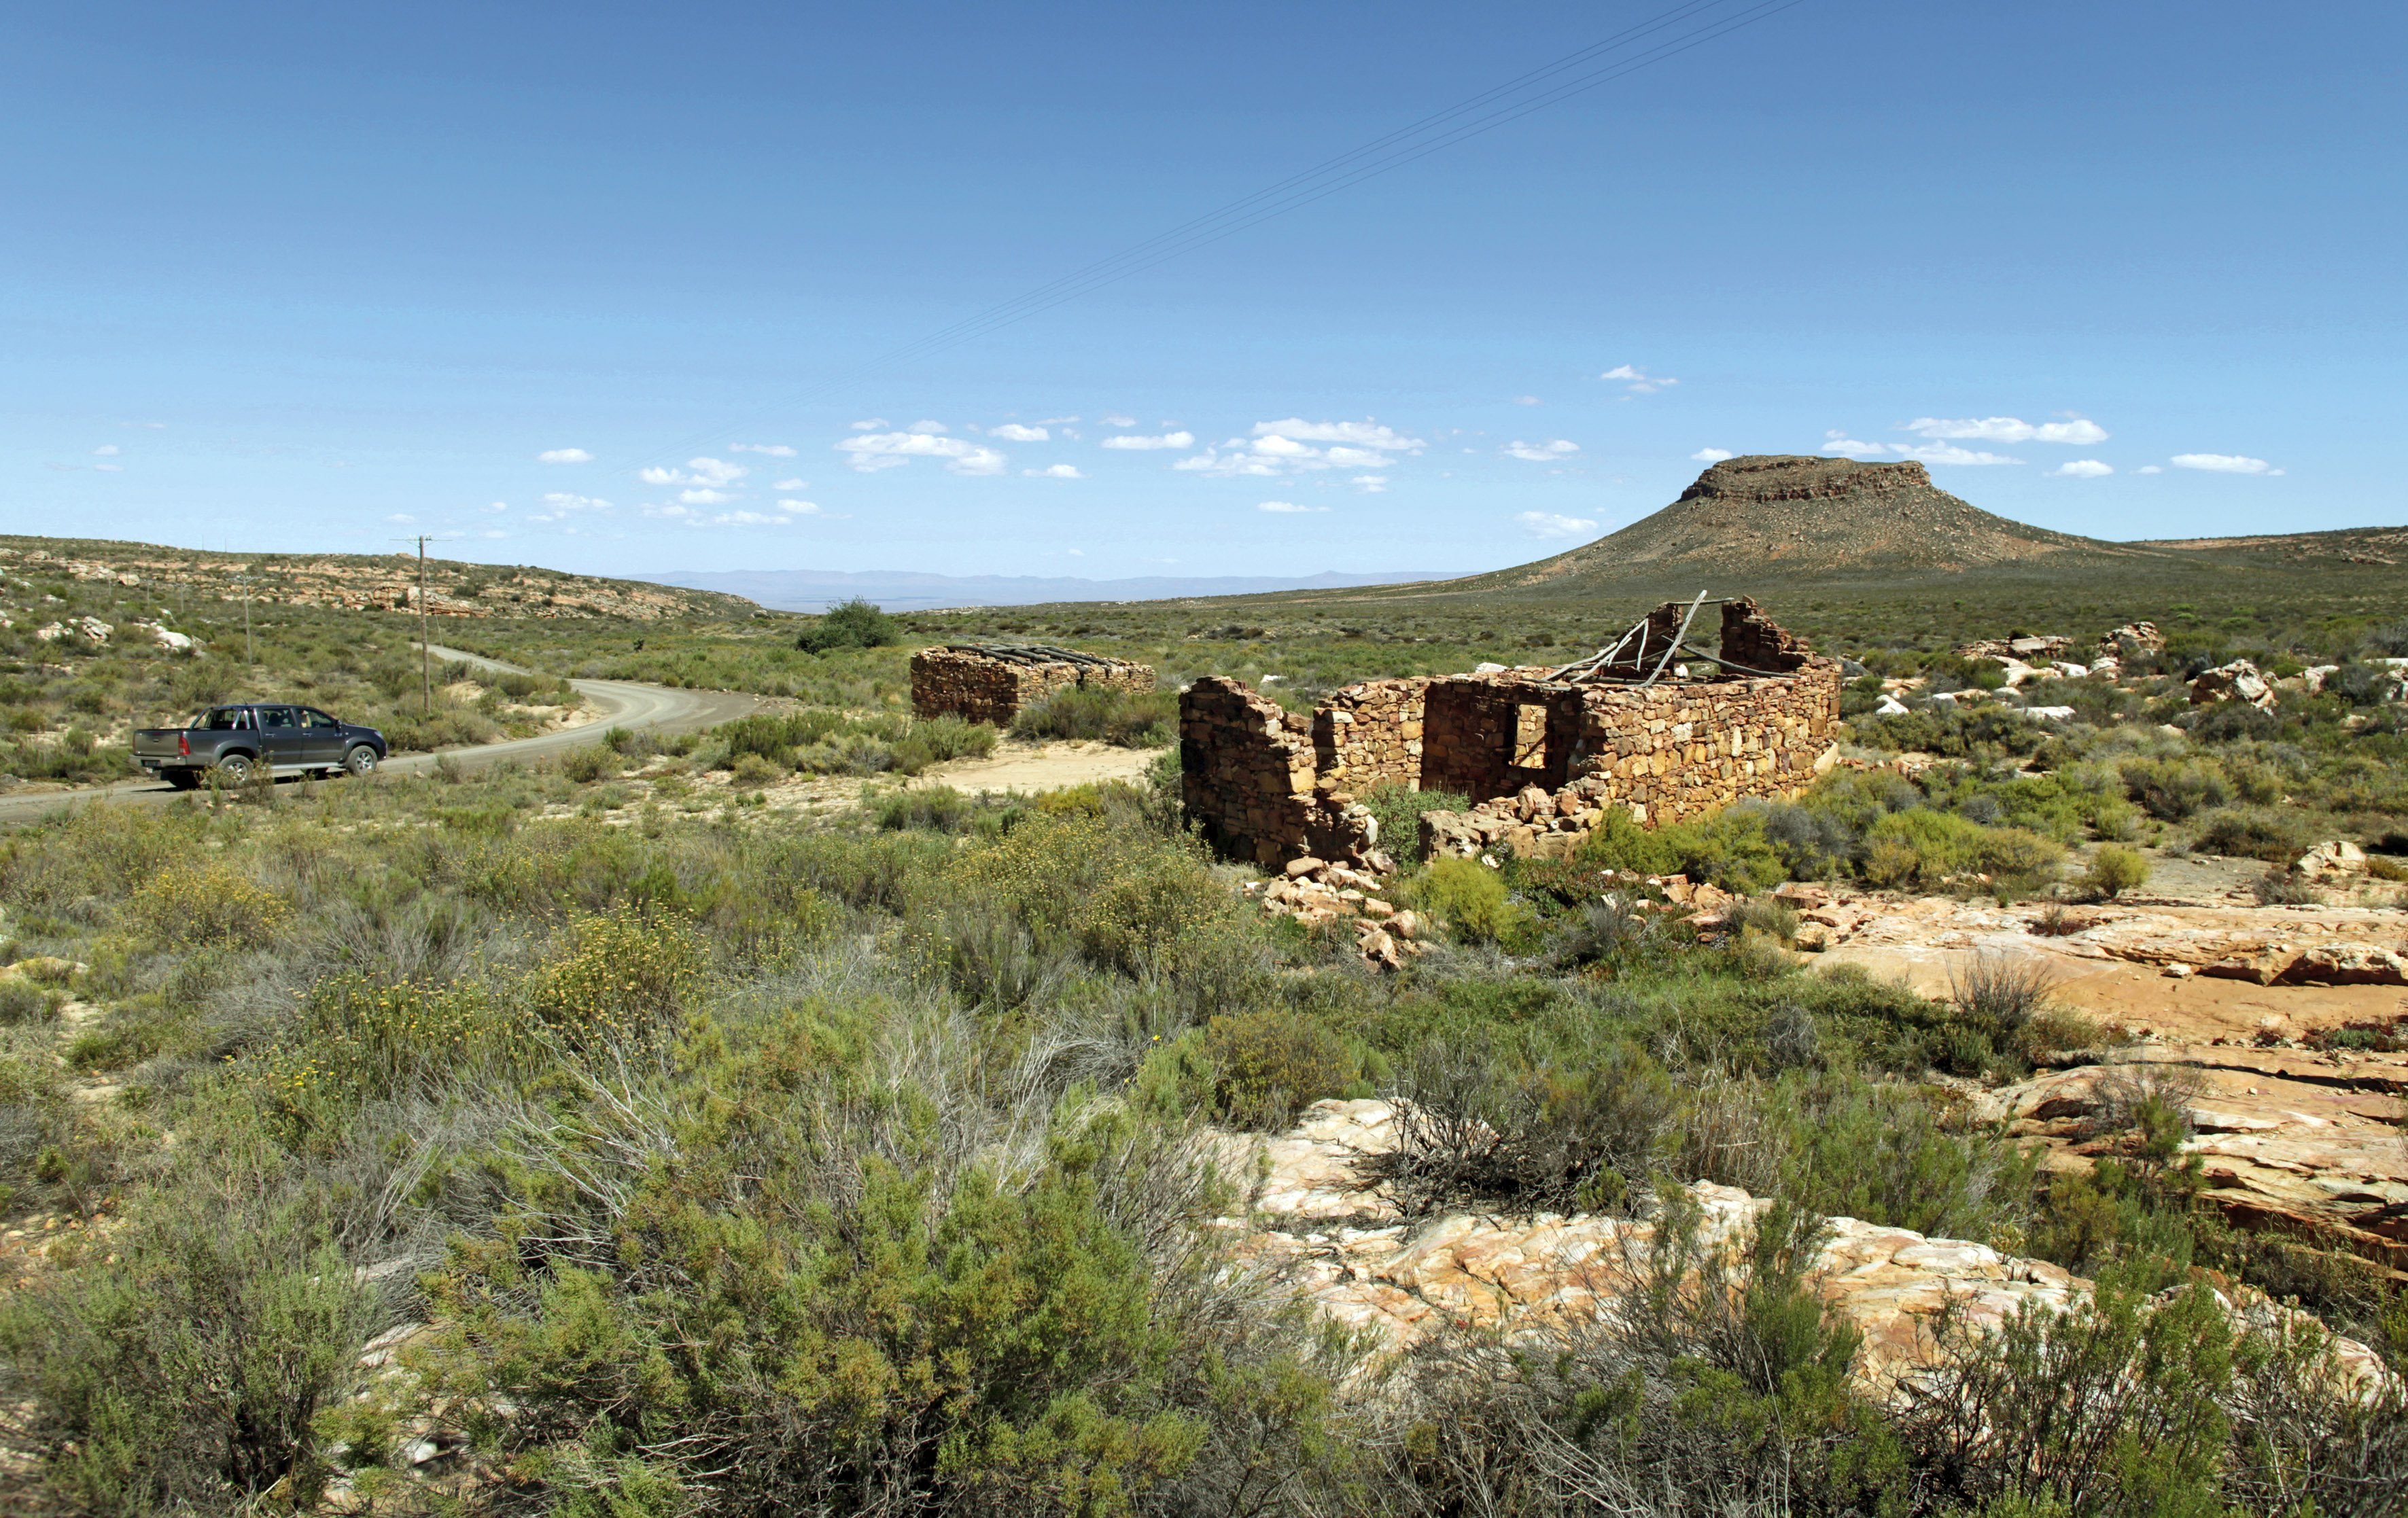 The flat plains next to Pramberg offered good grazing and a convenient overnight stop en route to the Karoo, but those who tried to establish a more permanent settlement were driven off by the lack of a reliable water source. Feature text available. (Photo by Gallo Images/GO!/Ruvan Boshoff)